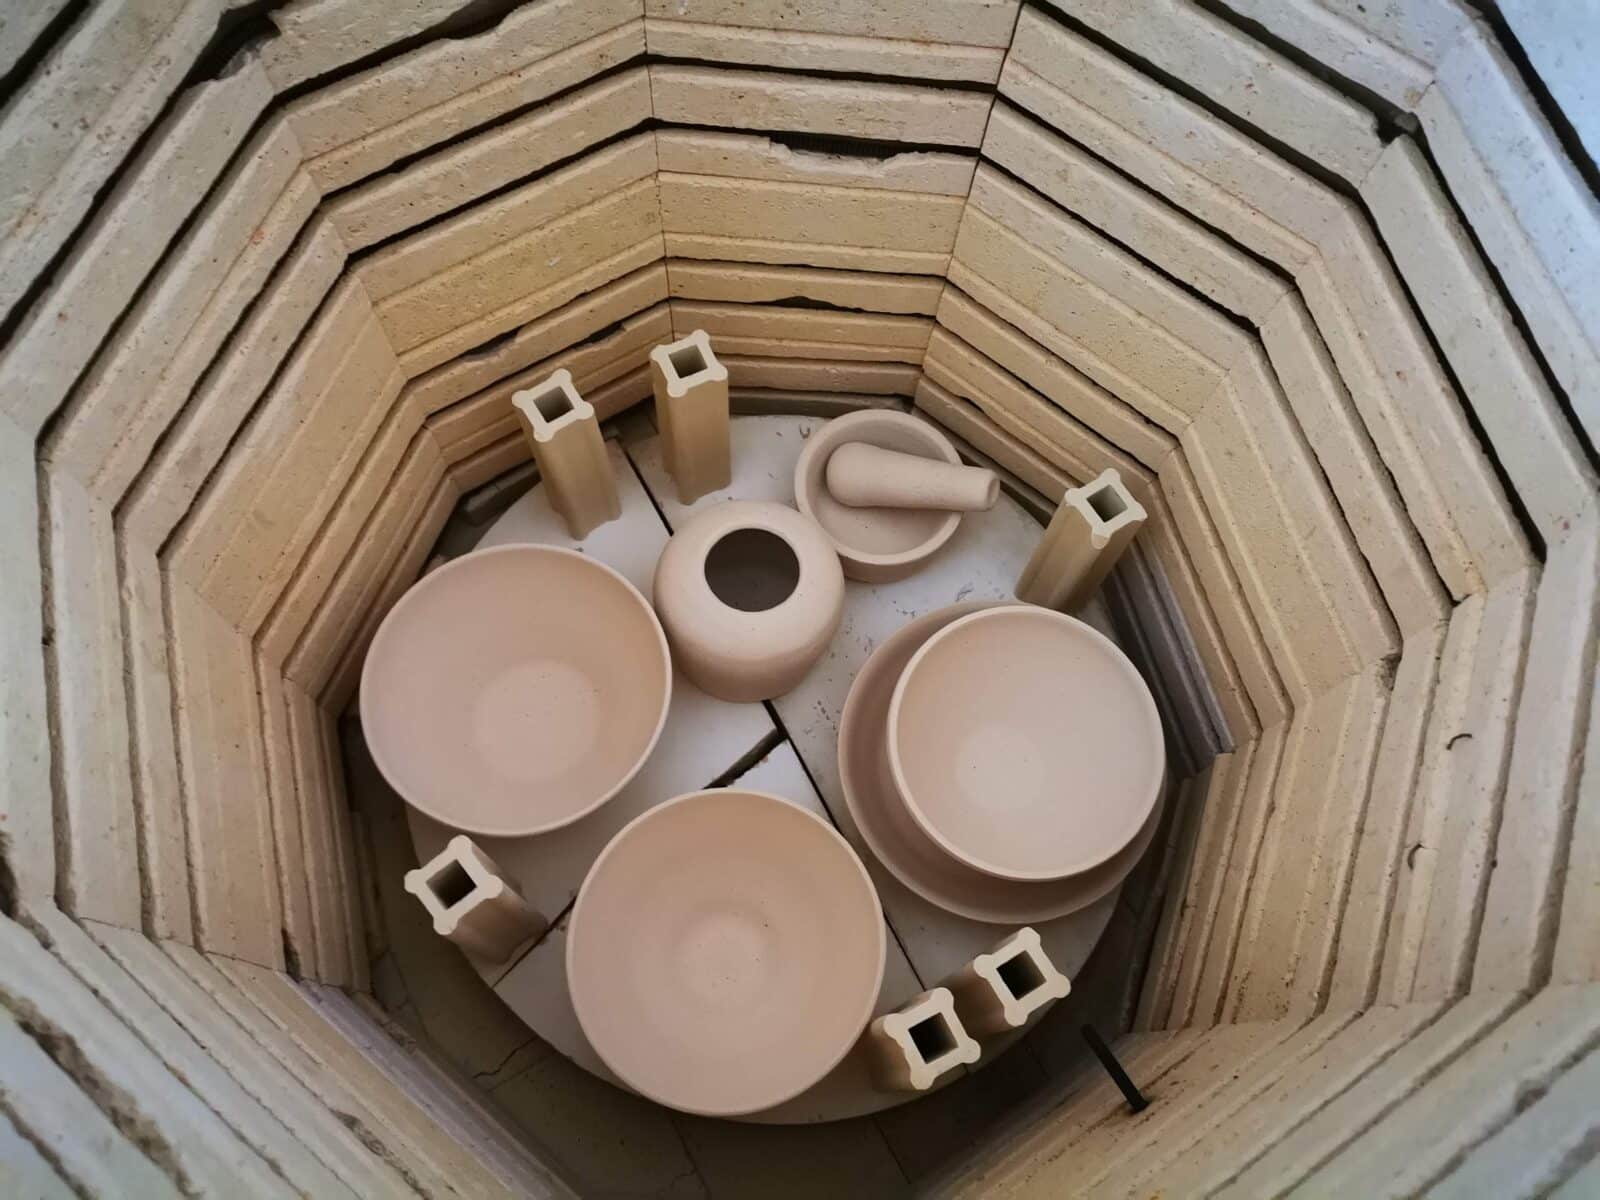 Fired ware in the kiln